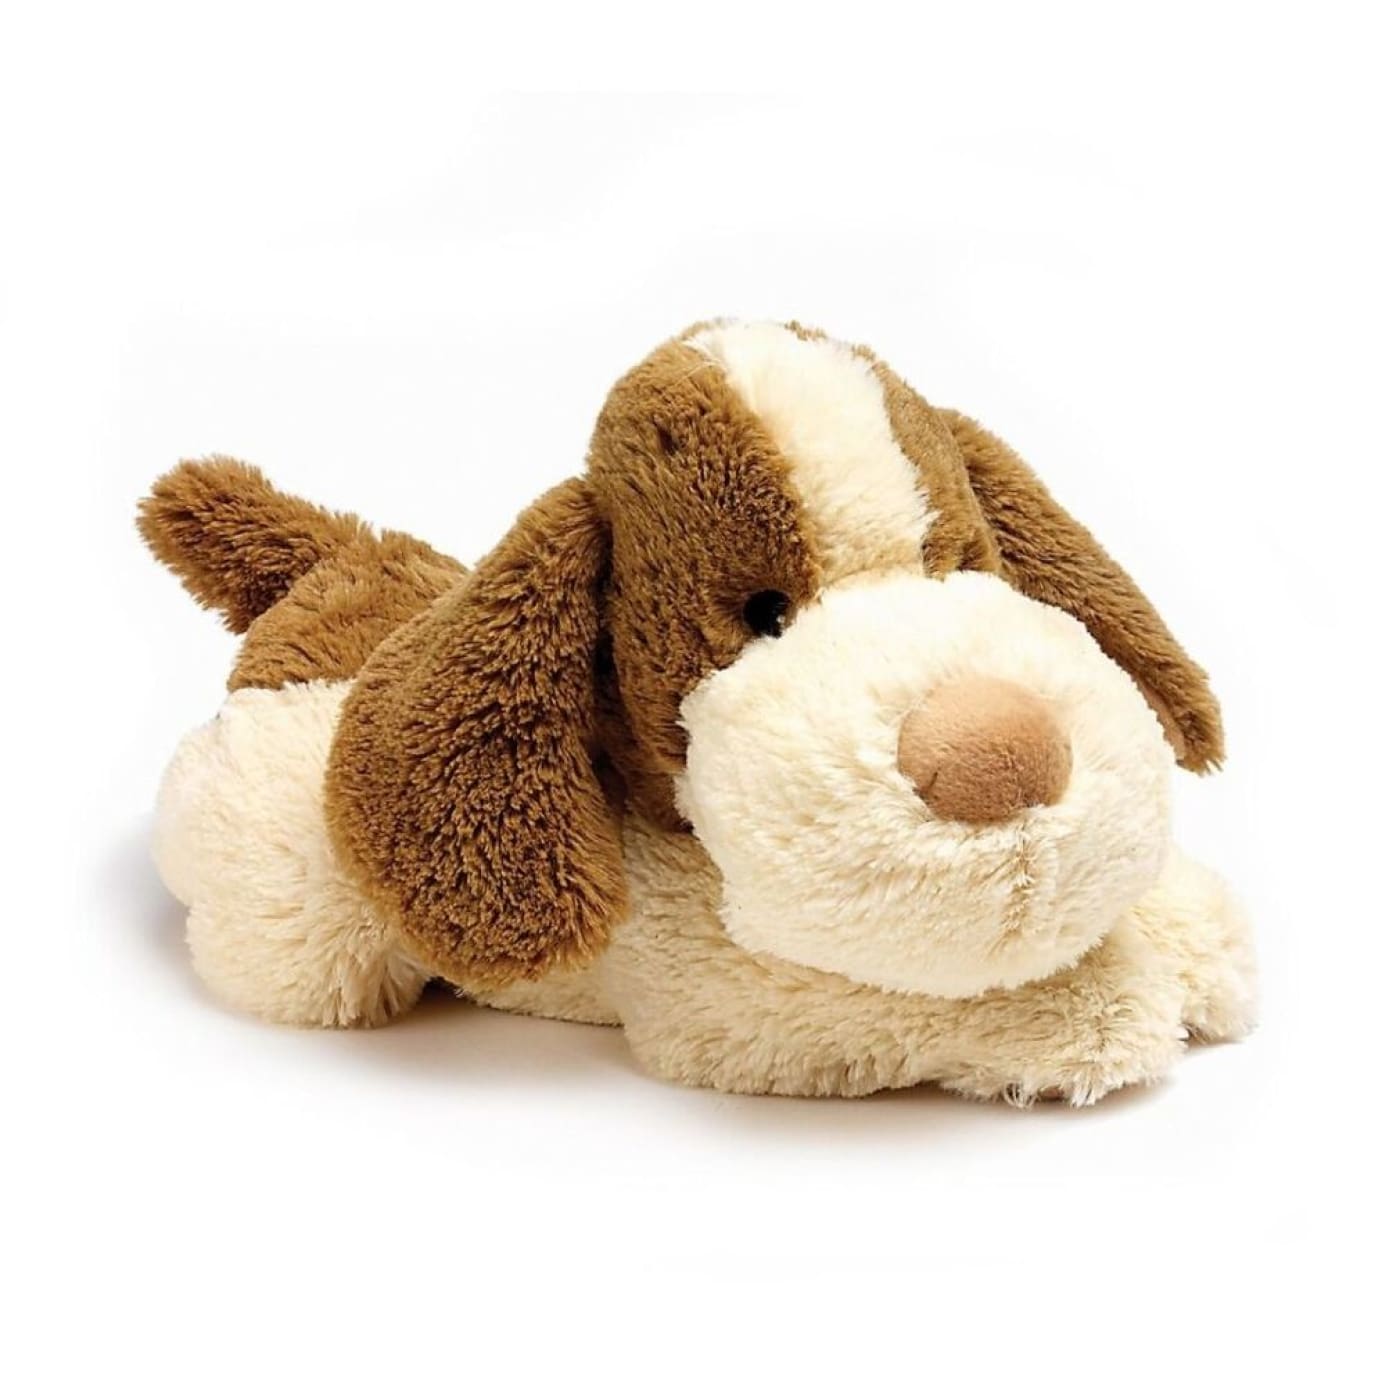 Warmies Cozy Plush - Brown Puppy - Patch Puppy - HEALTH & HOME SAFETY - THERMOMETERS/MEDICINAL